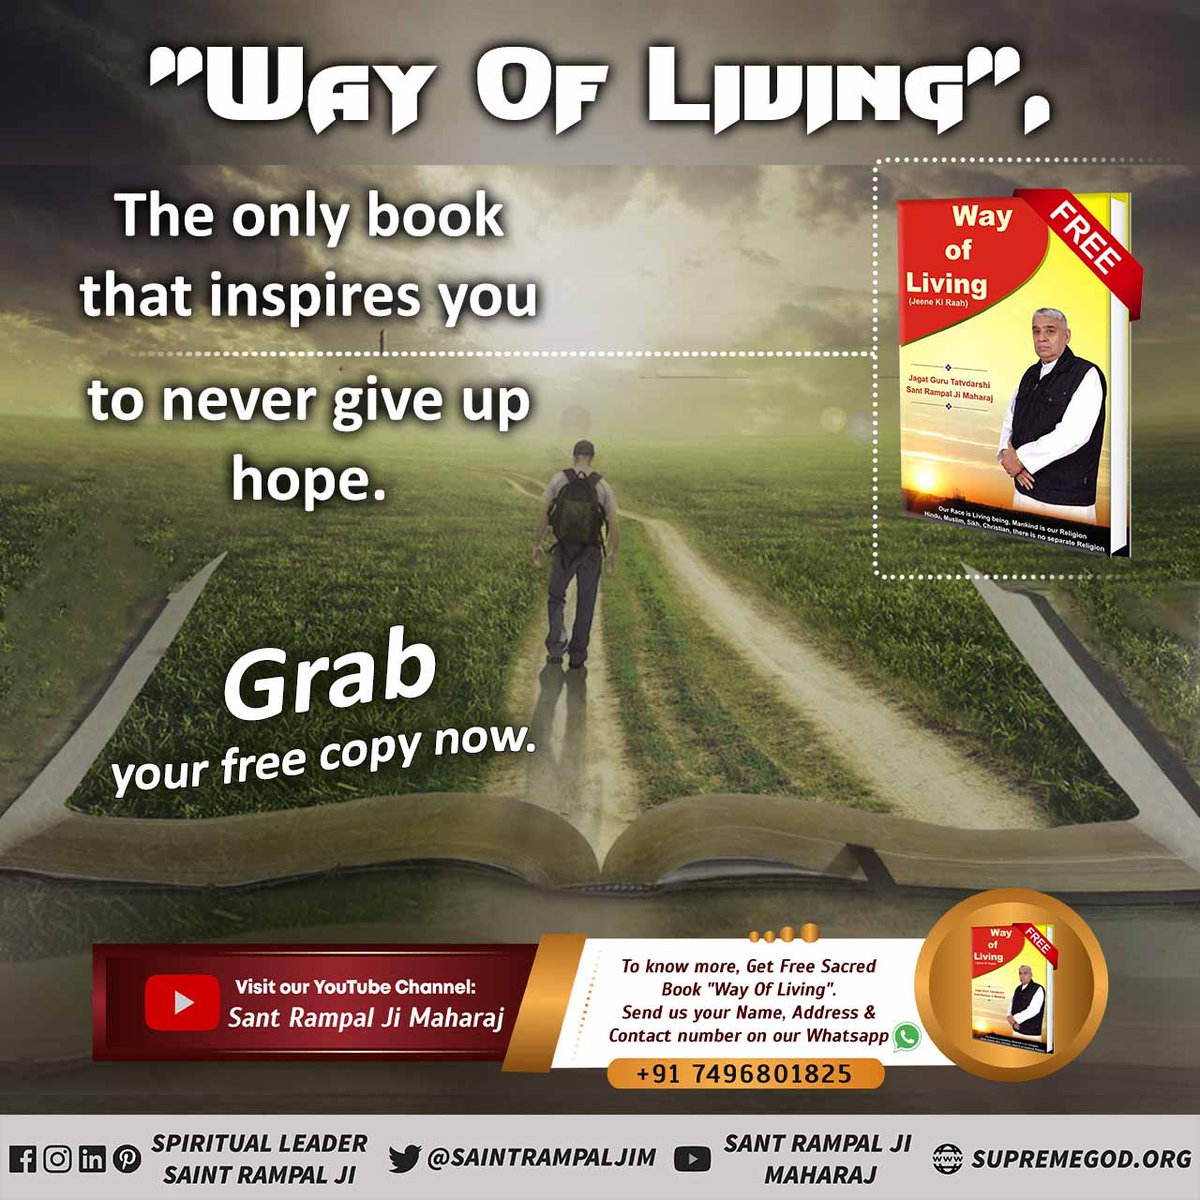 #मानसिक_शांति_नहींतो_कुछनहीं

'Way of living' 
The only book that inspires you to never give up hope.  Grap your free copy now . Please order ✅📗book jine ki rah free of cost with Home dilevery.
Please send me complete address
Name ..
Pta..
State..
District.
Mobile.
Pin..
House.